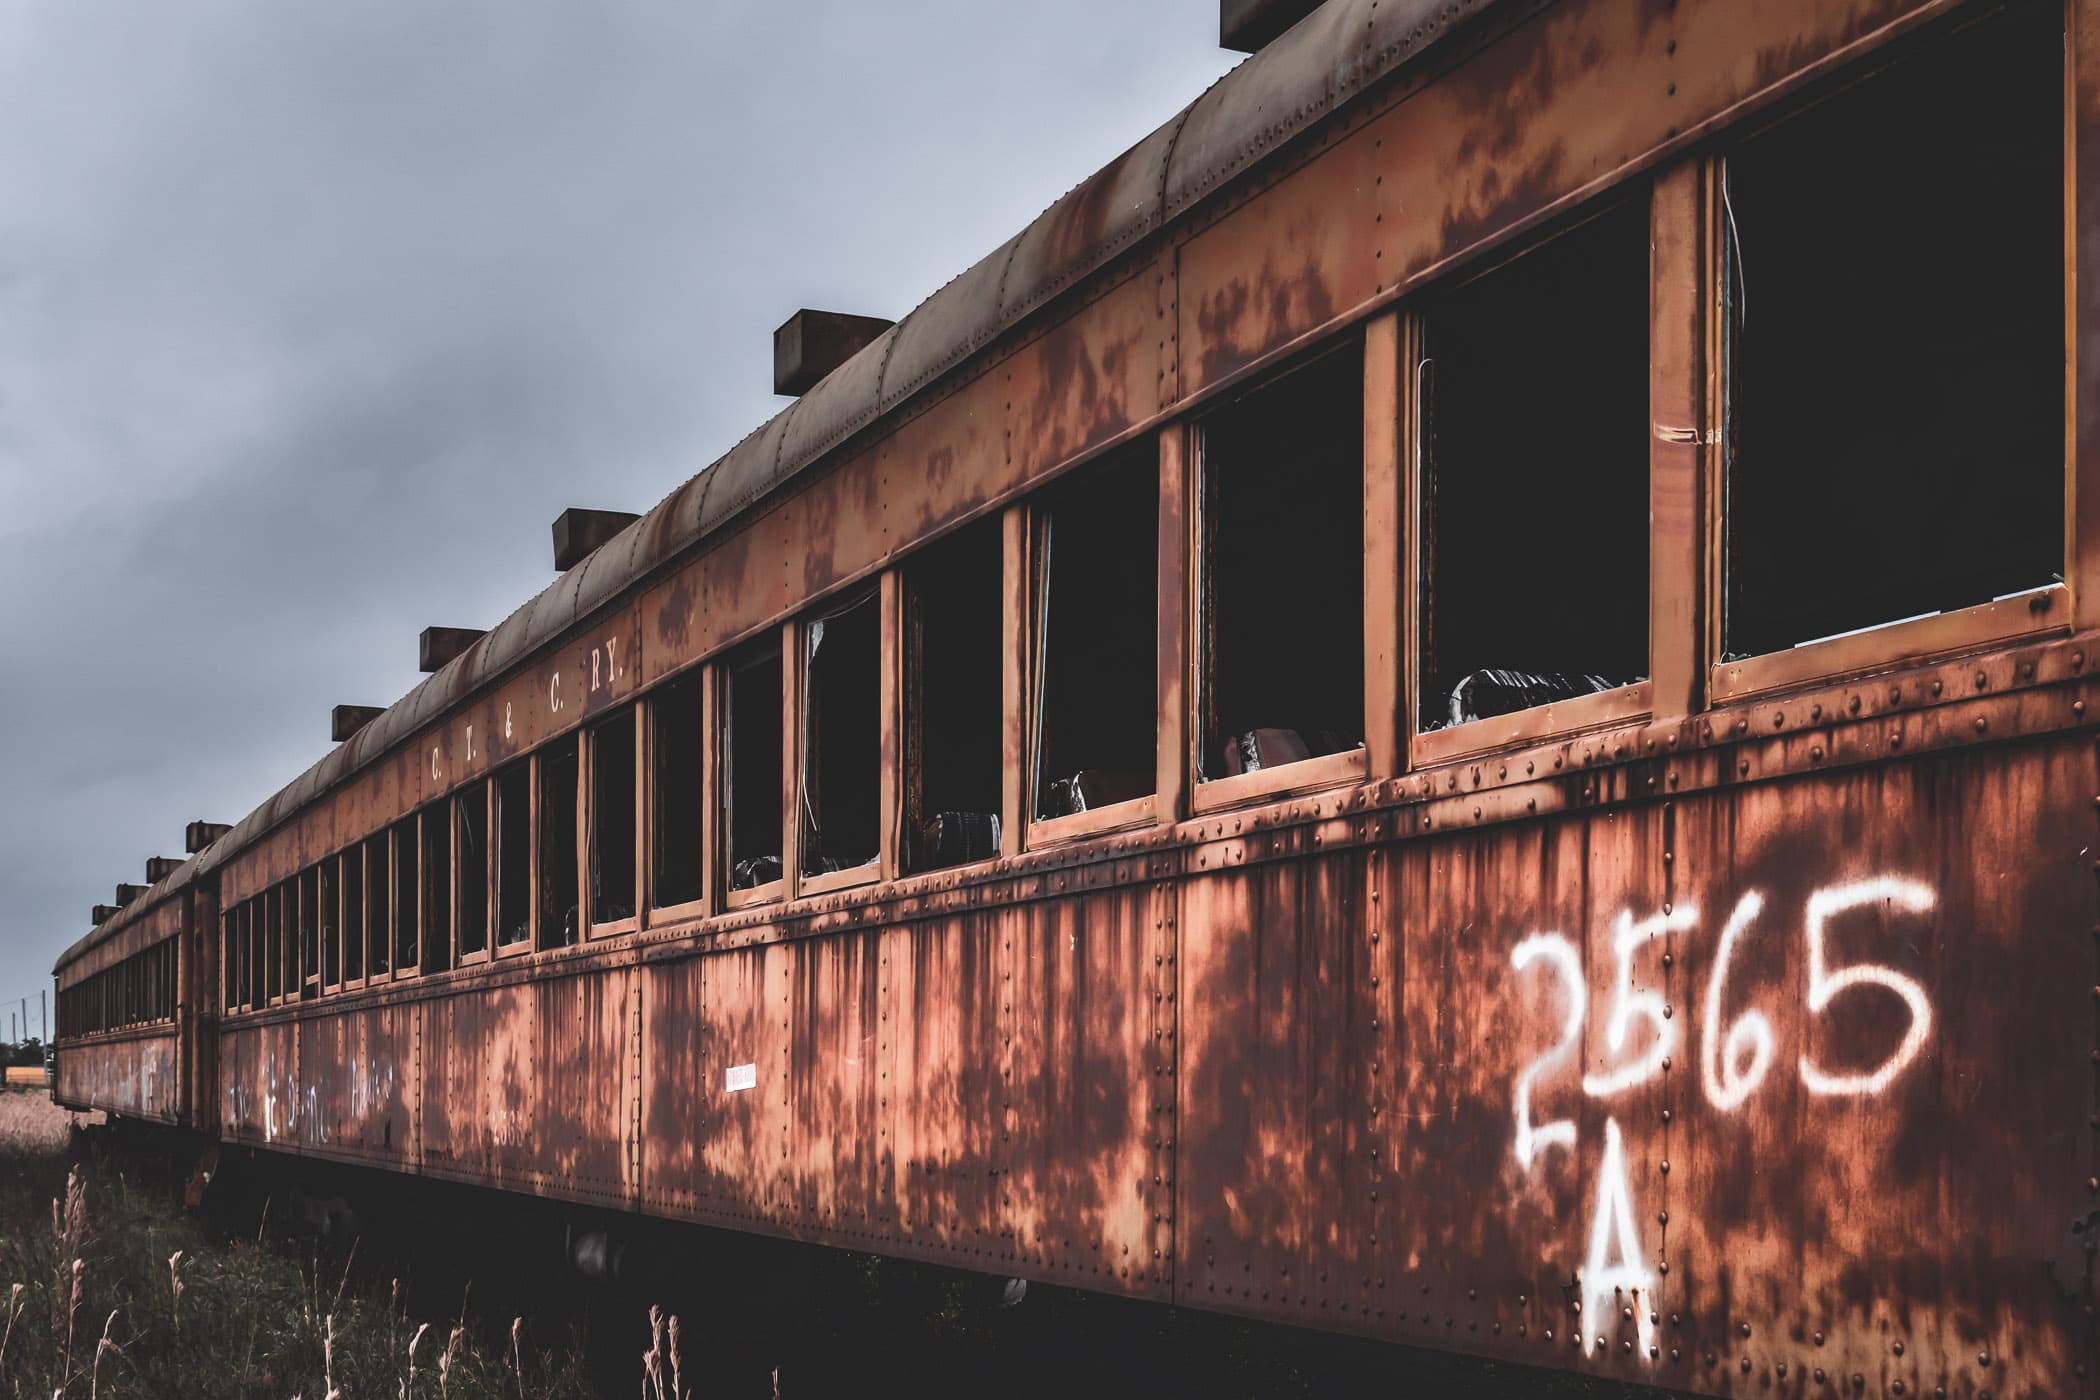 An abandoned railcar sits rotting in the Union Pacific rail yard at Galveston, Texas.